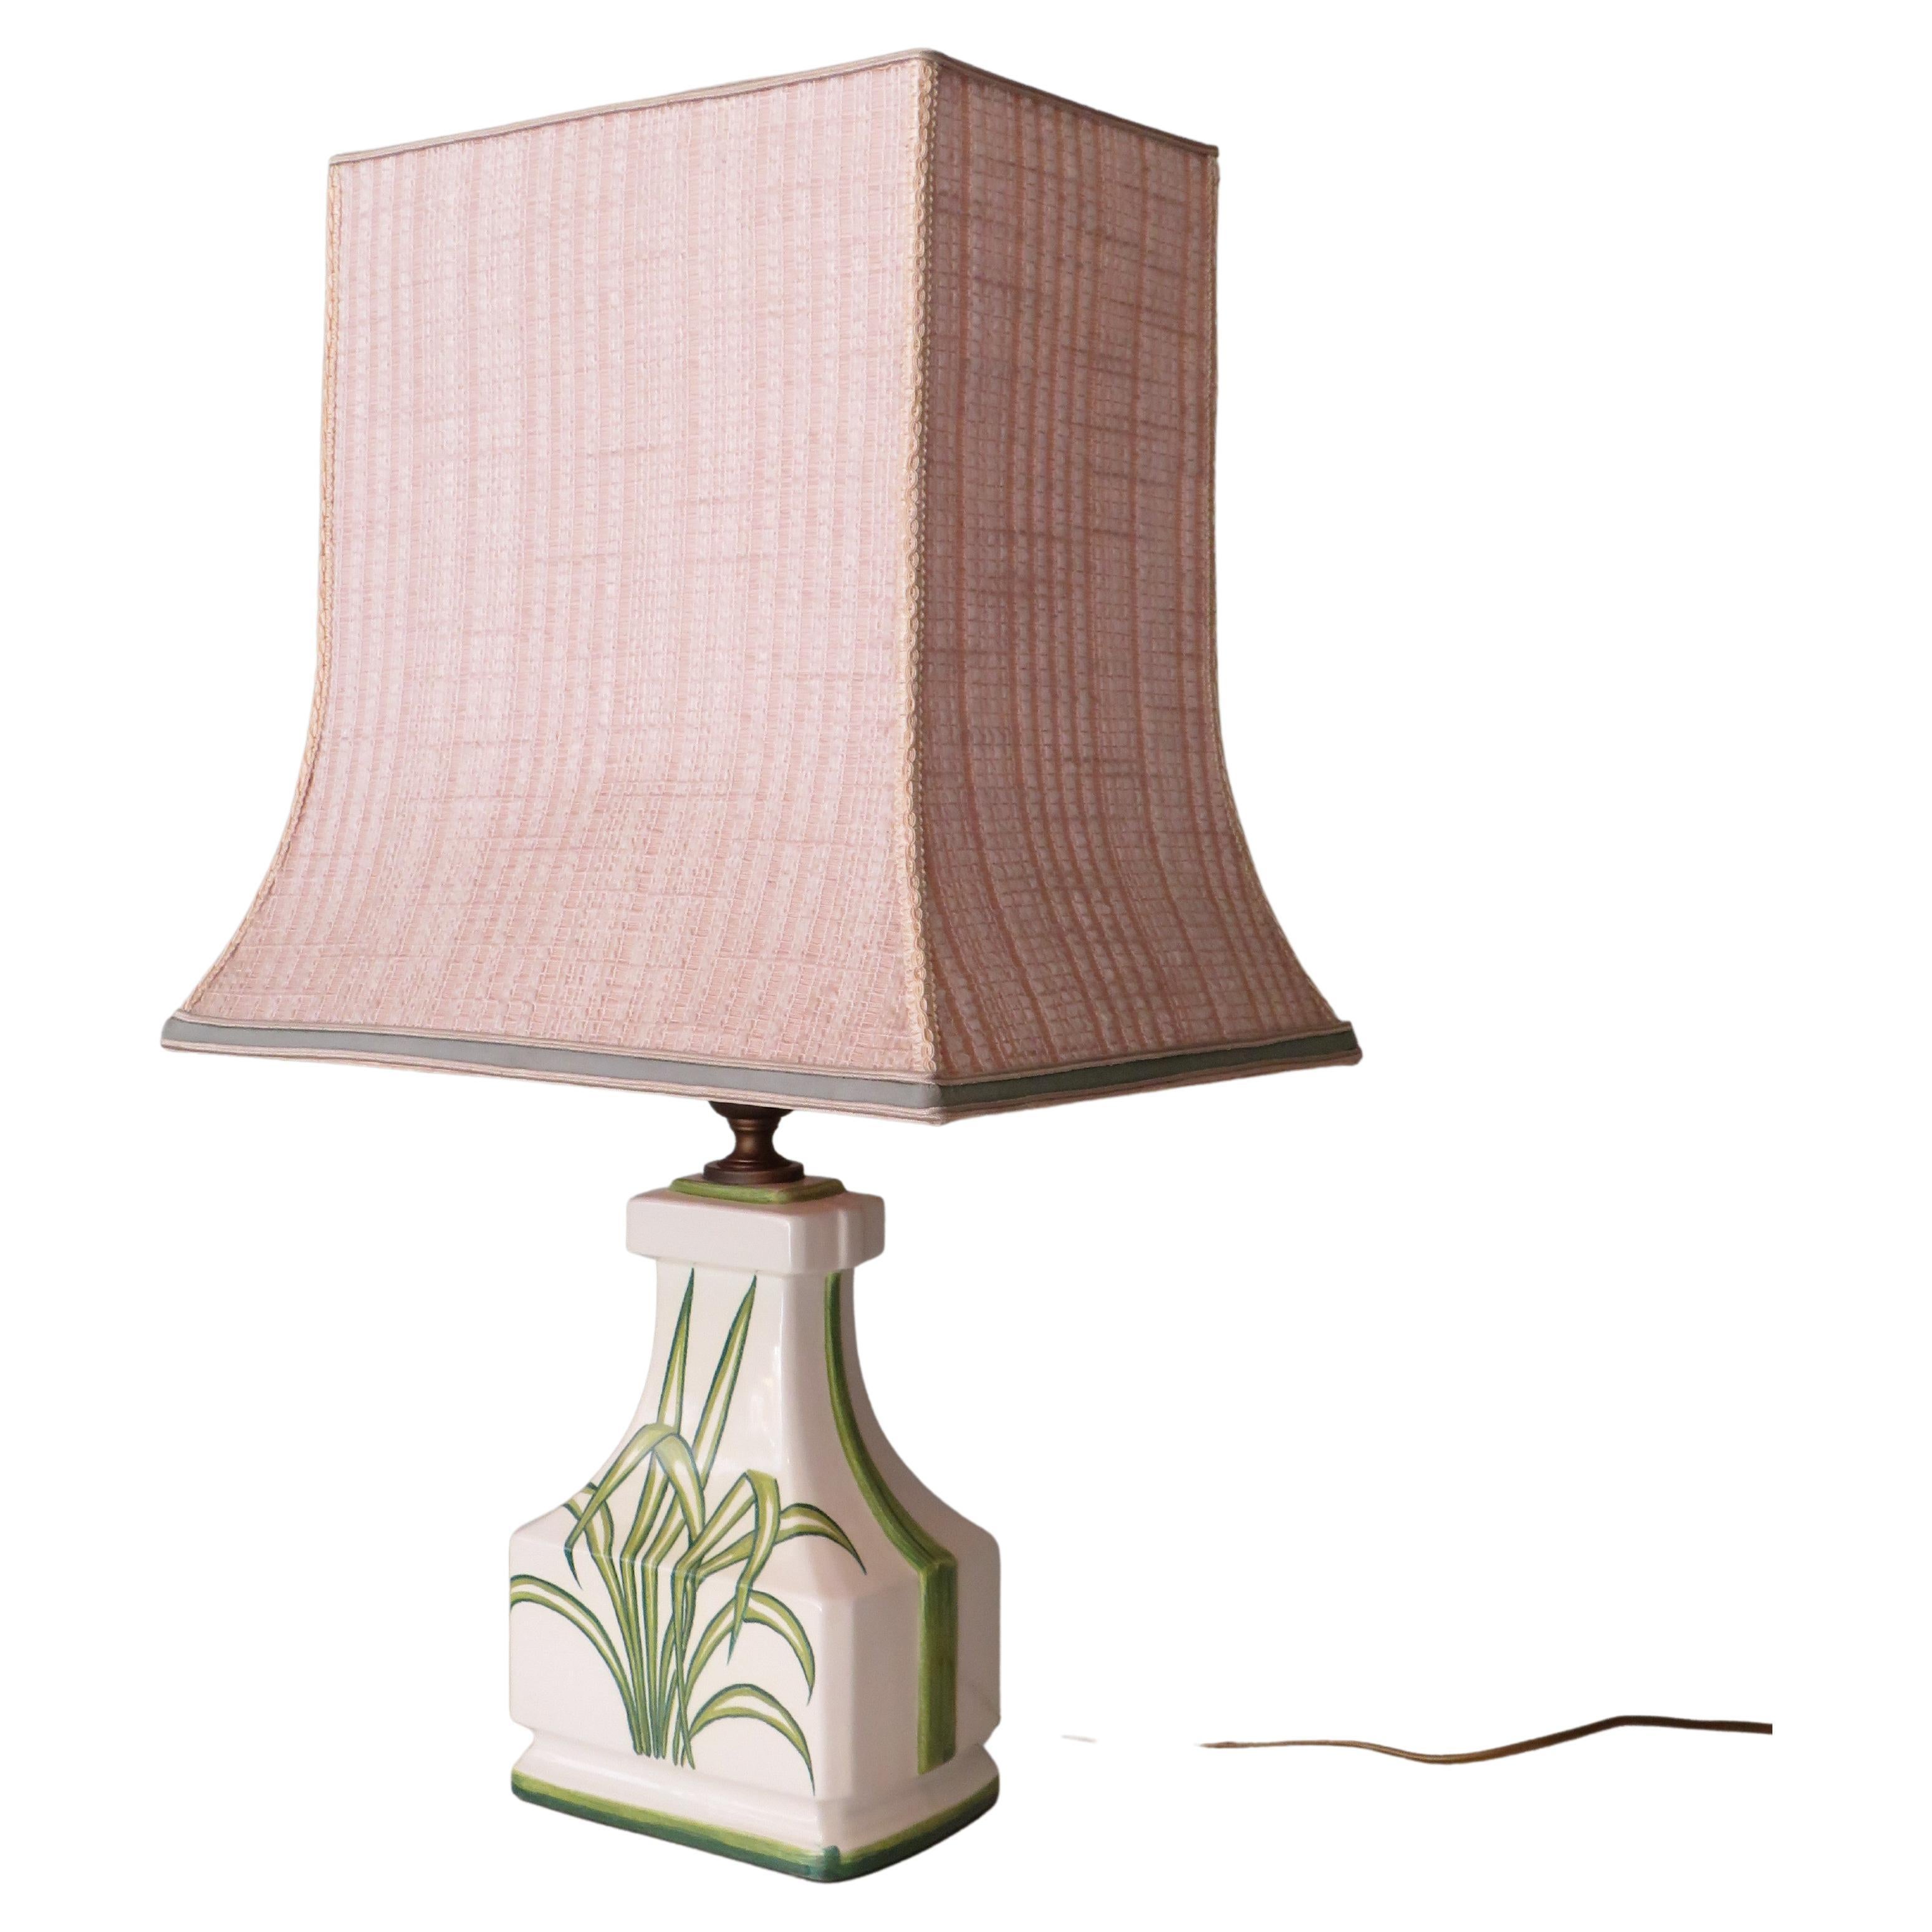 Mid-Century Ceramic Table Lamp with Pagoda Shaped Lampshade, France, 1960s For Sale